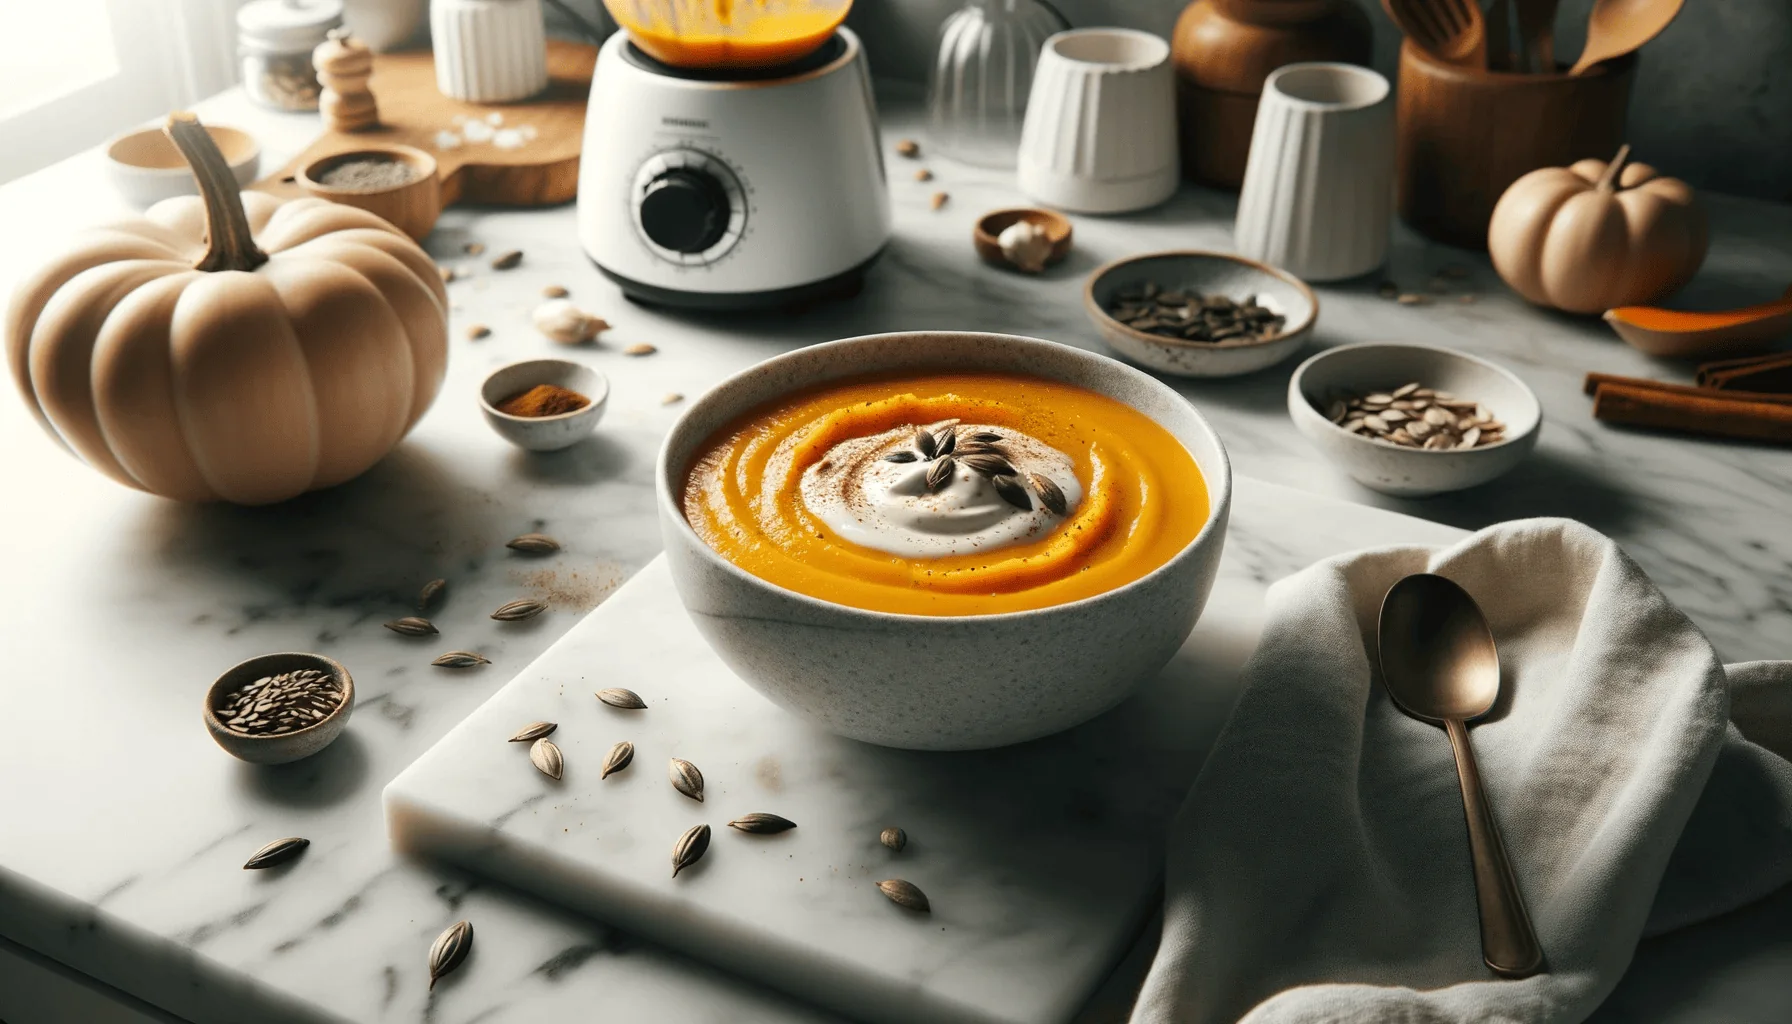 Roasted butternut squash soup, ready to serve